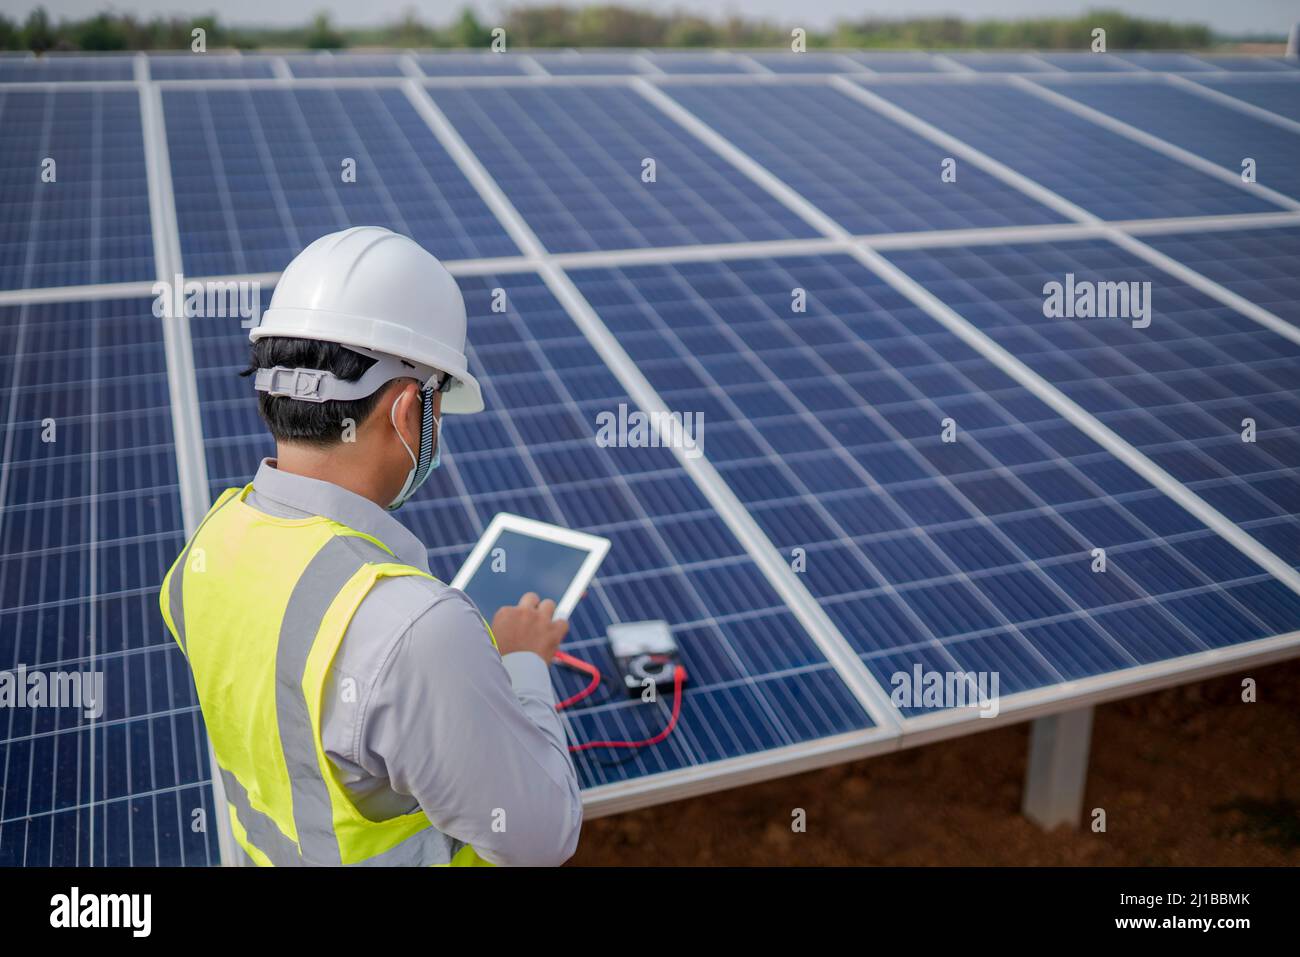 Electrical engineering works with solar panels to produce renewable energy. Stock Photo